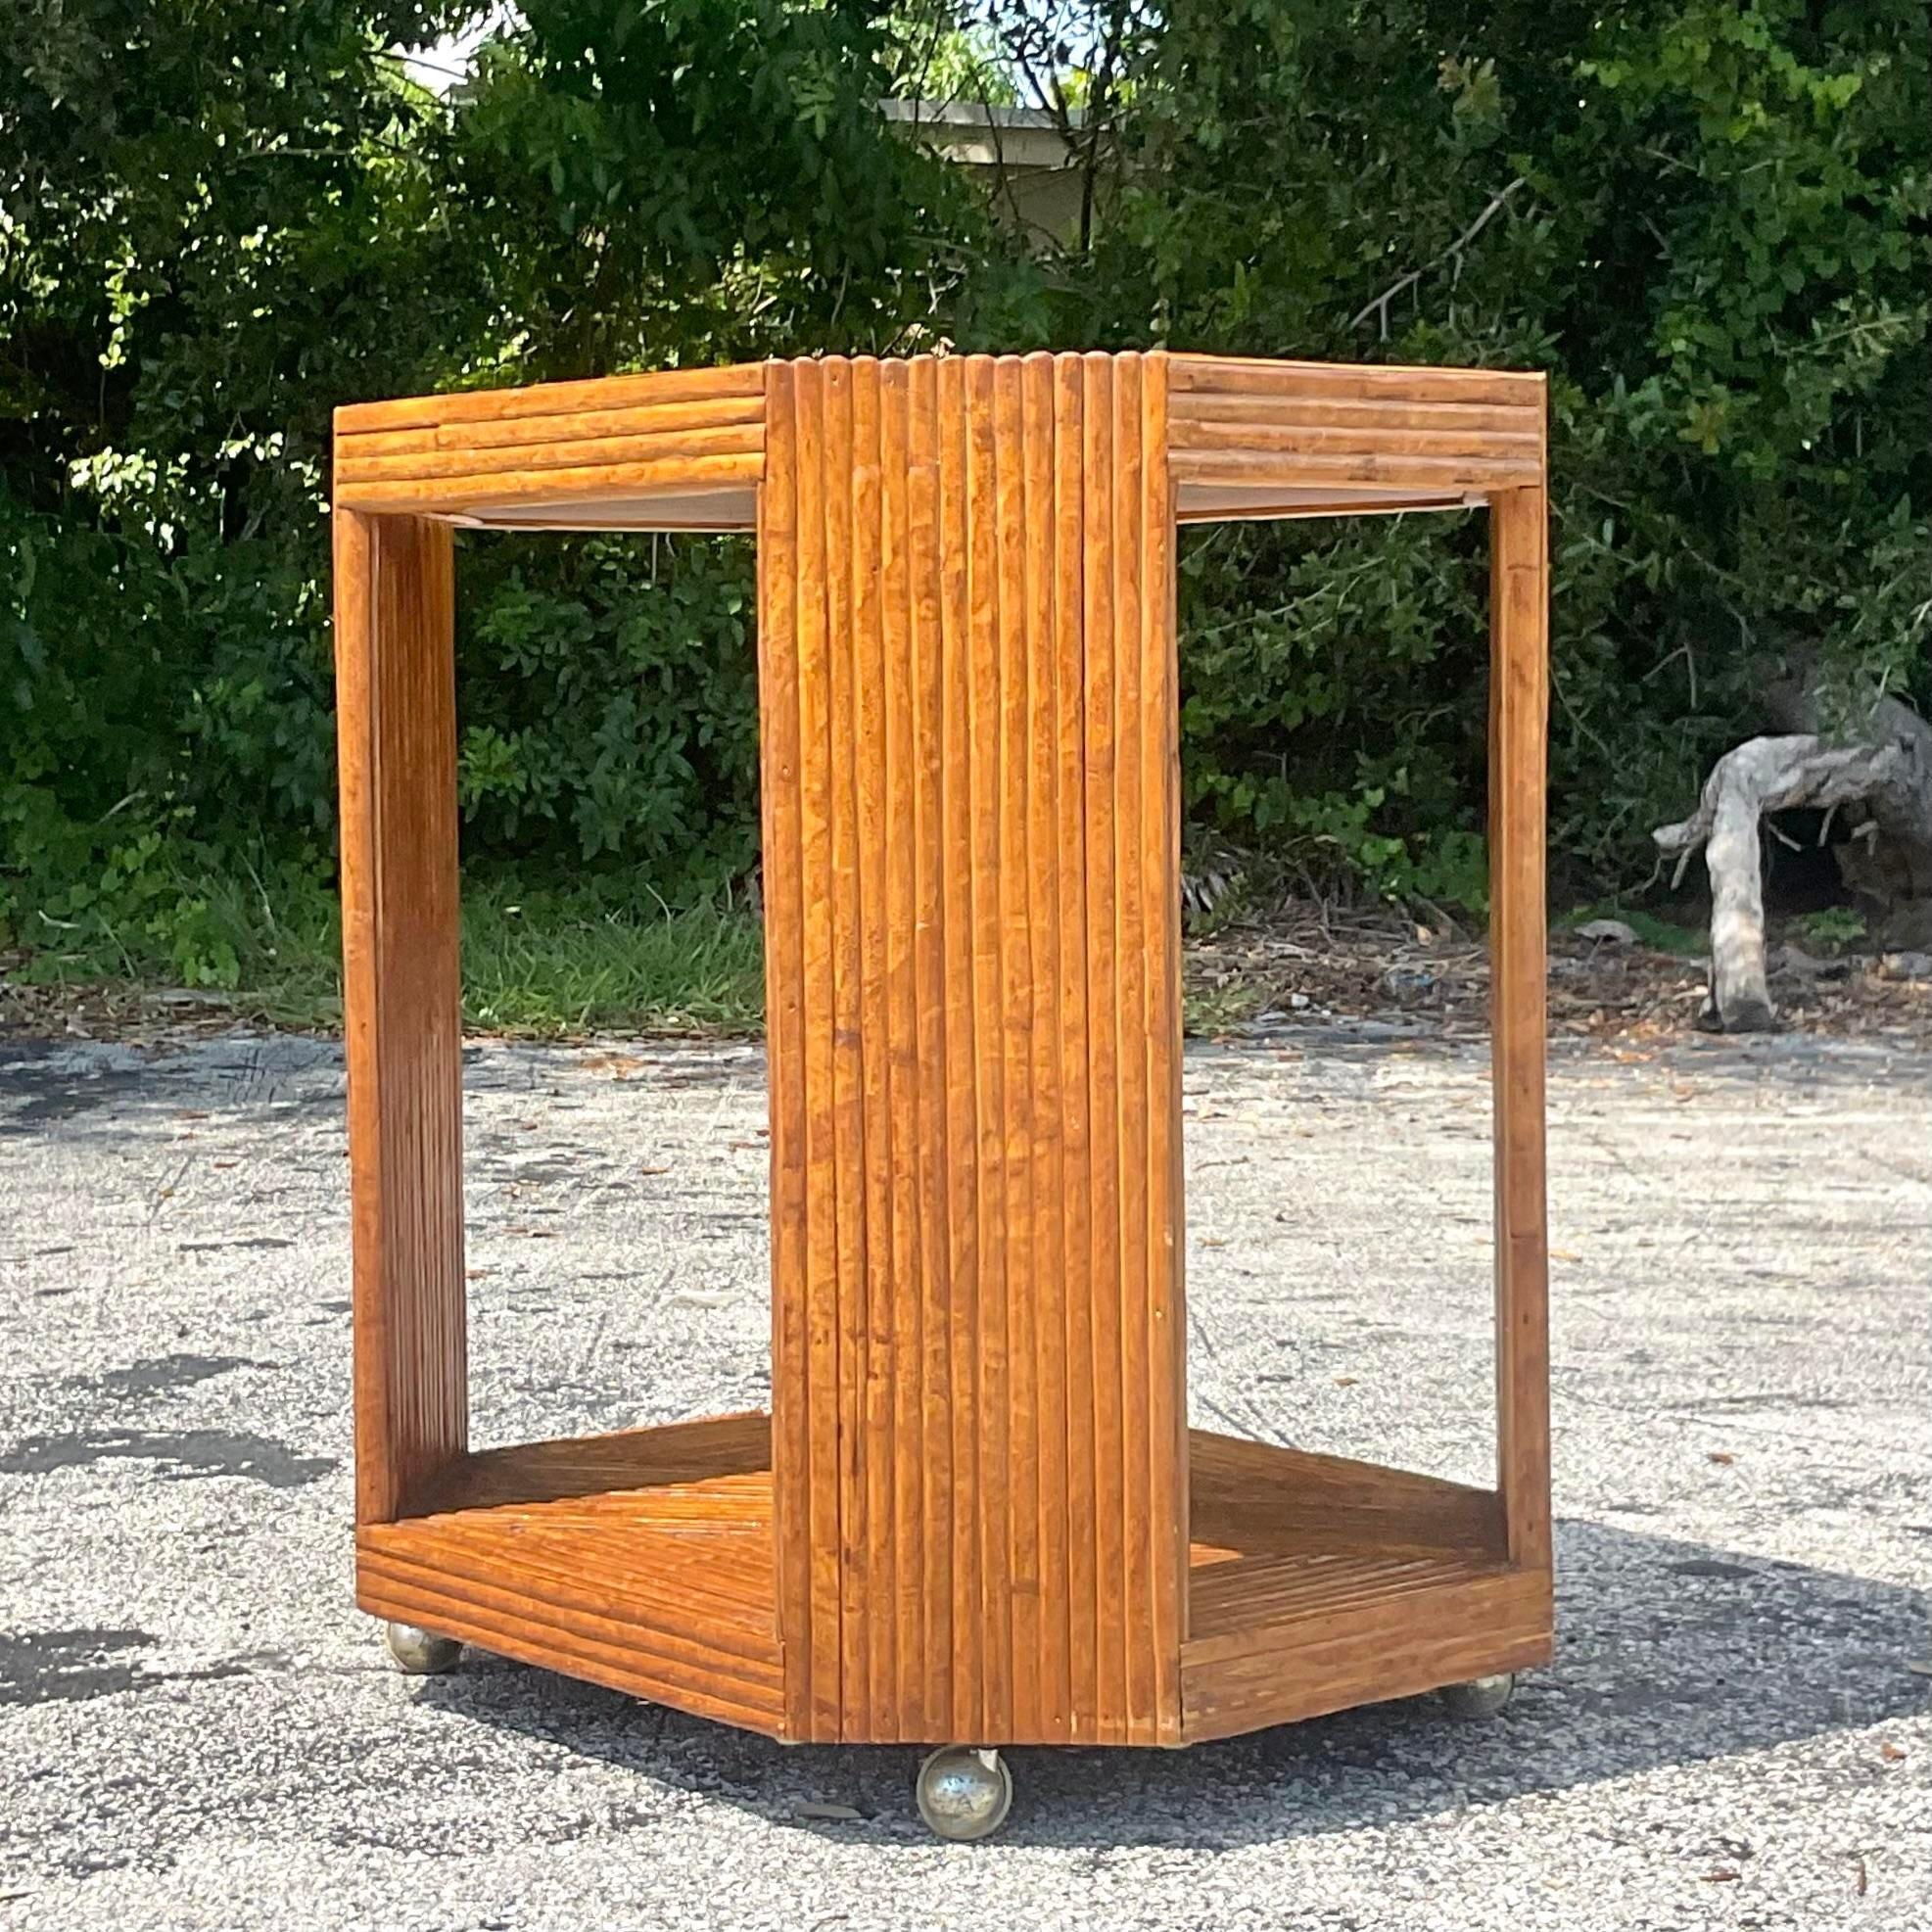 A fabulous vintage Coastal bar cart. A chic faceted design in a pretzel reed frame. Moves easily on casters. Perfect as a bar cart or even a chic TV stand. Acquired from a Miami estate. 